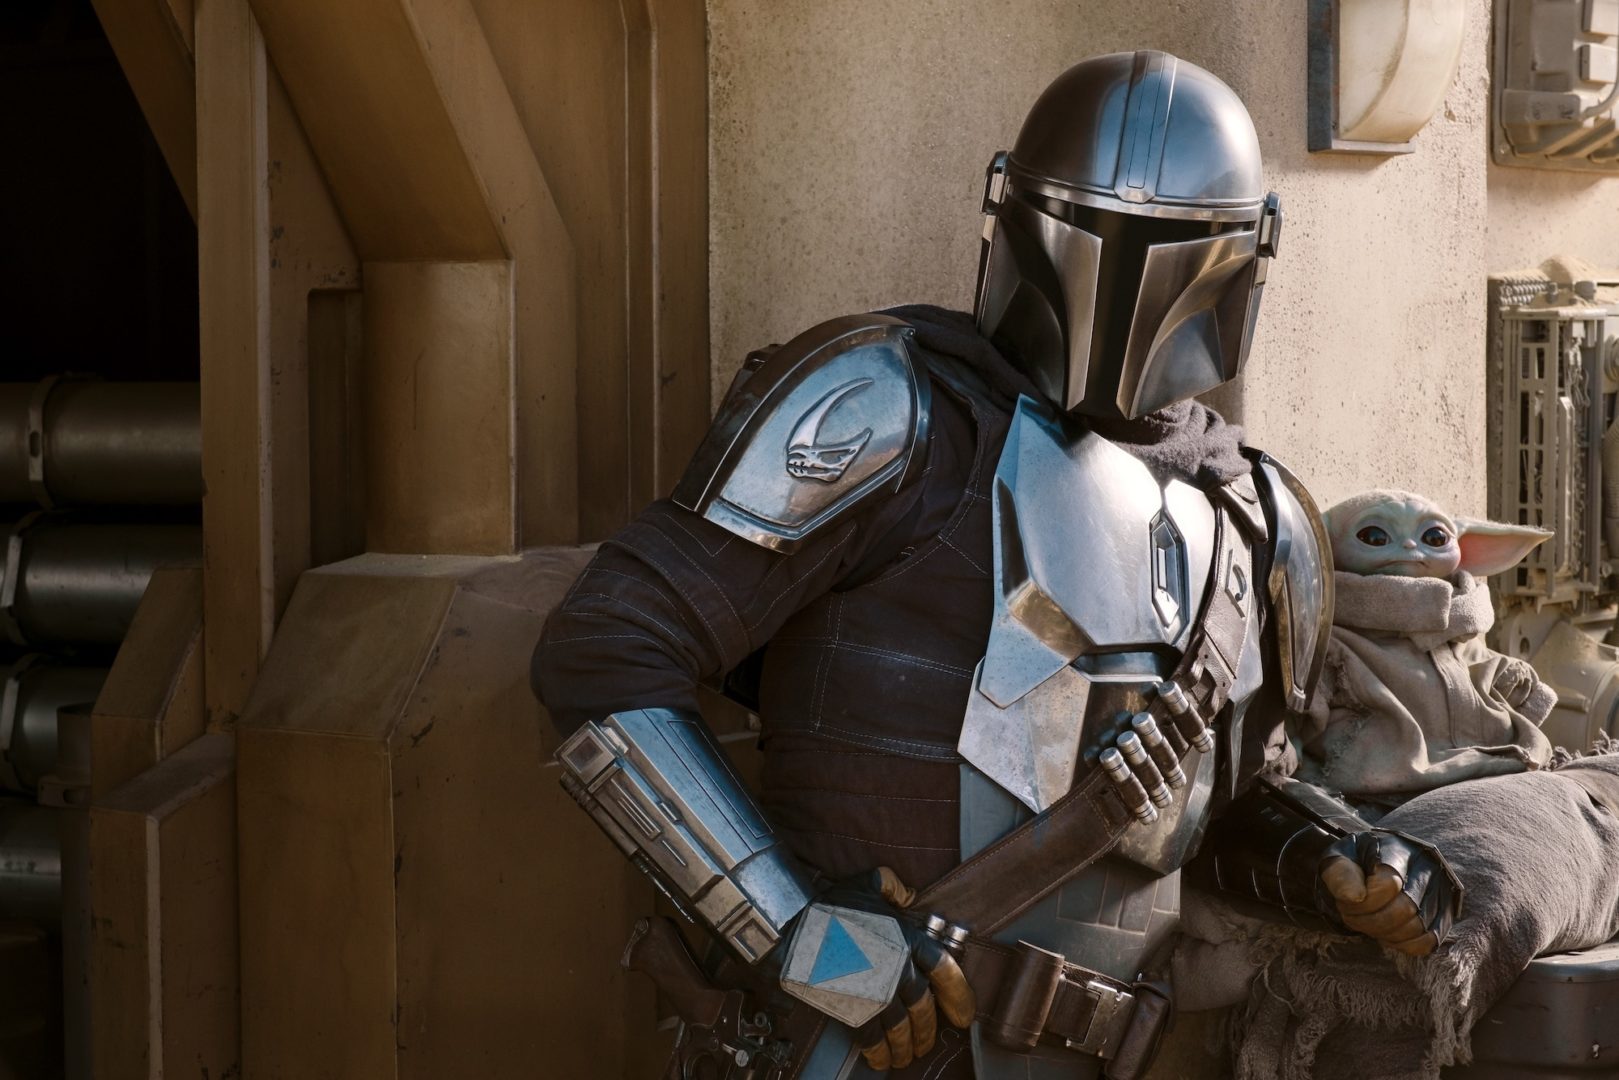 "The Mandalorian" received 24 Emmy nominations